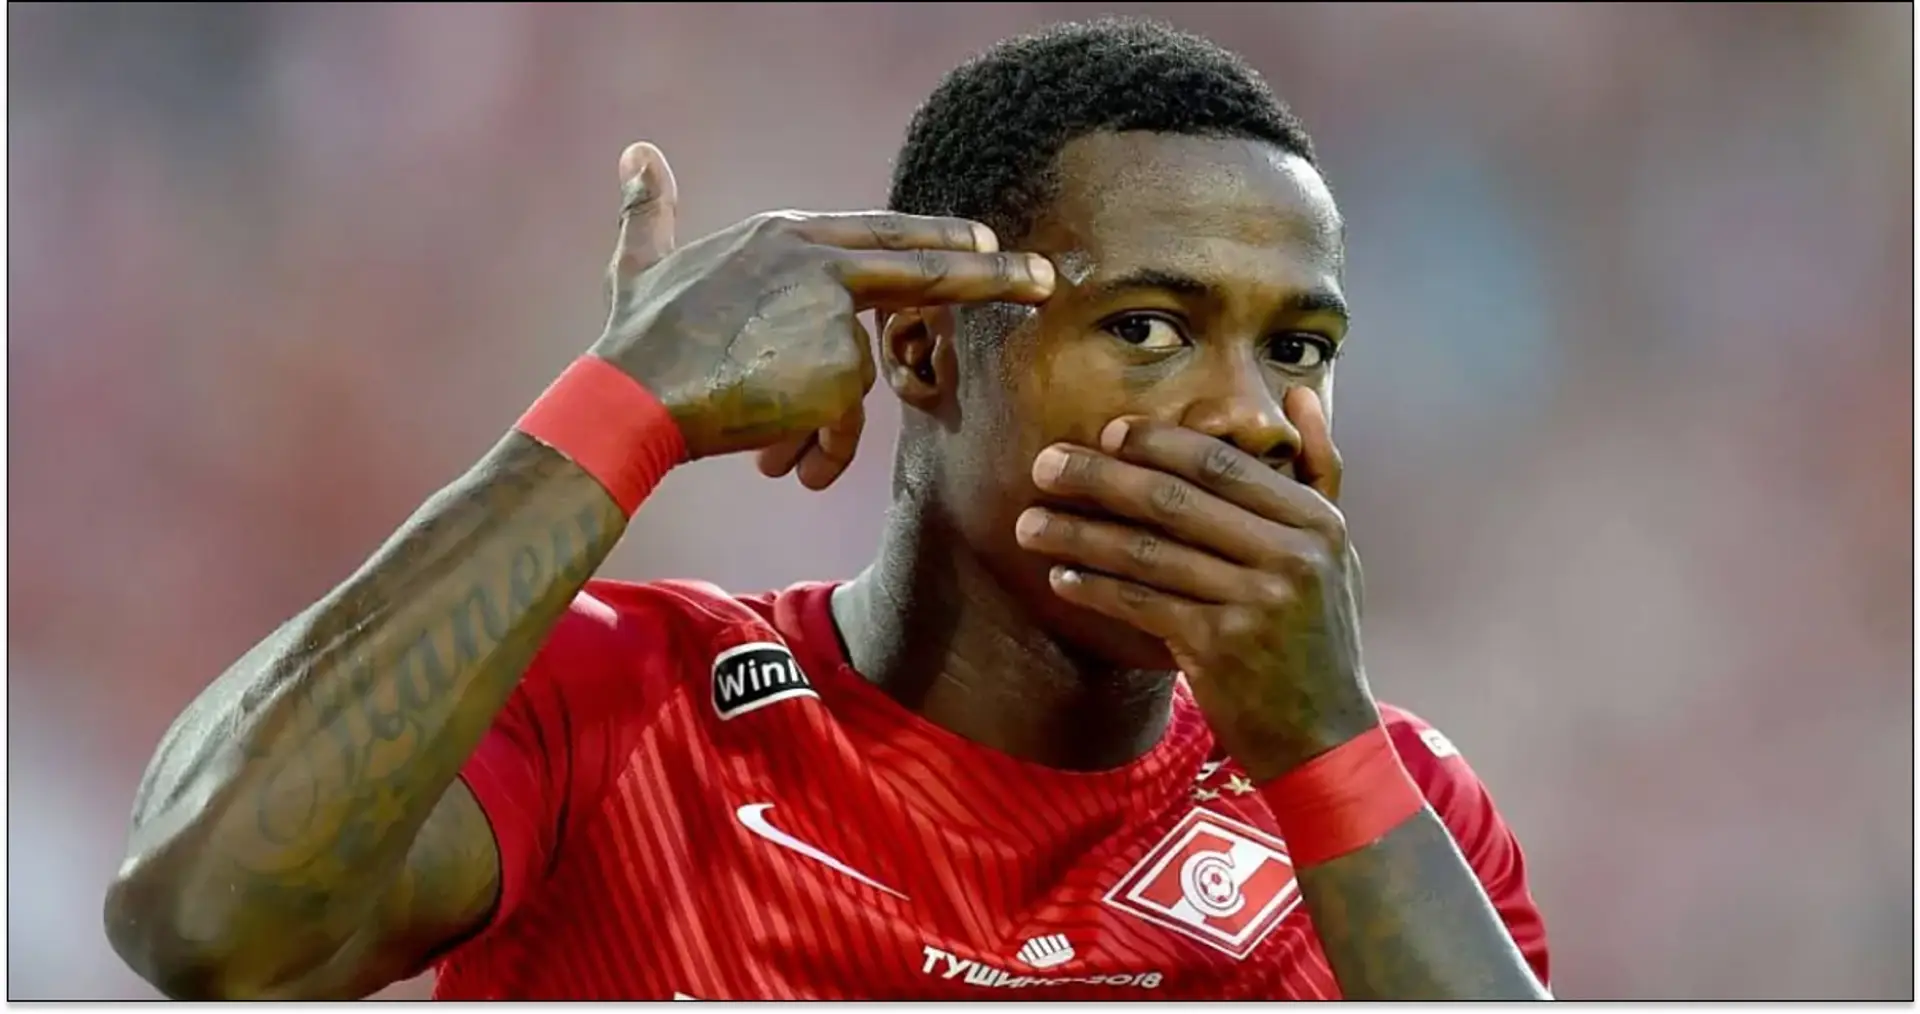 Netherlands forward Quincy Promes sentenced to 18 months in prison for stabbing cousin — but he may dodge jailtime in Russia